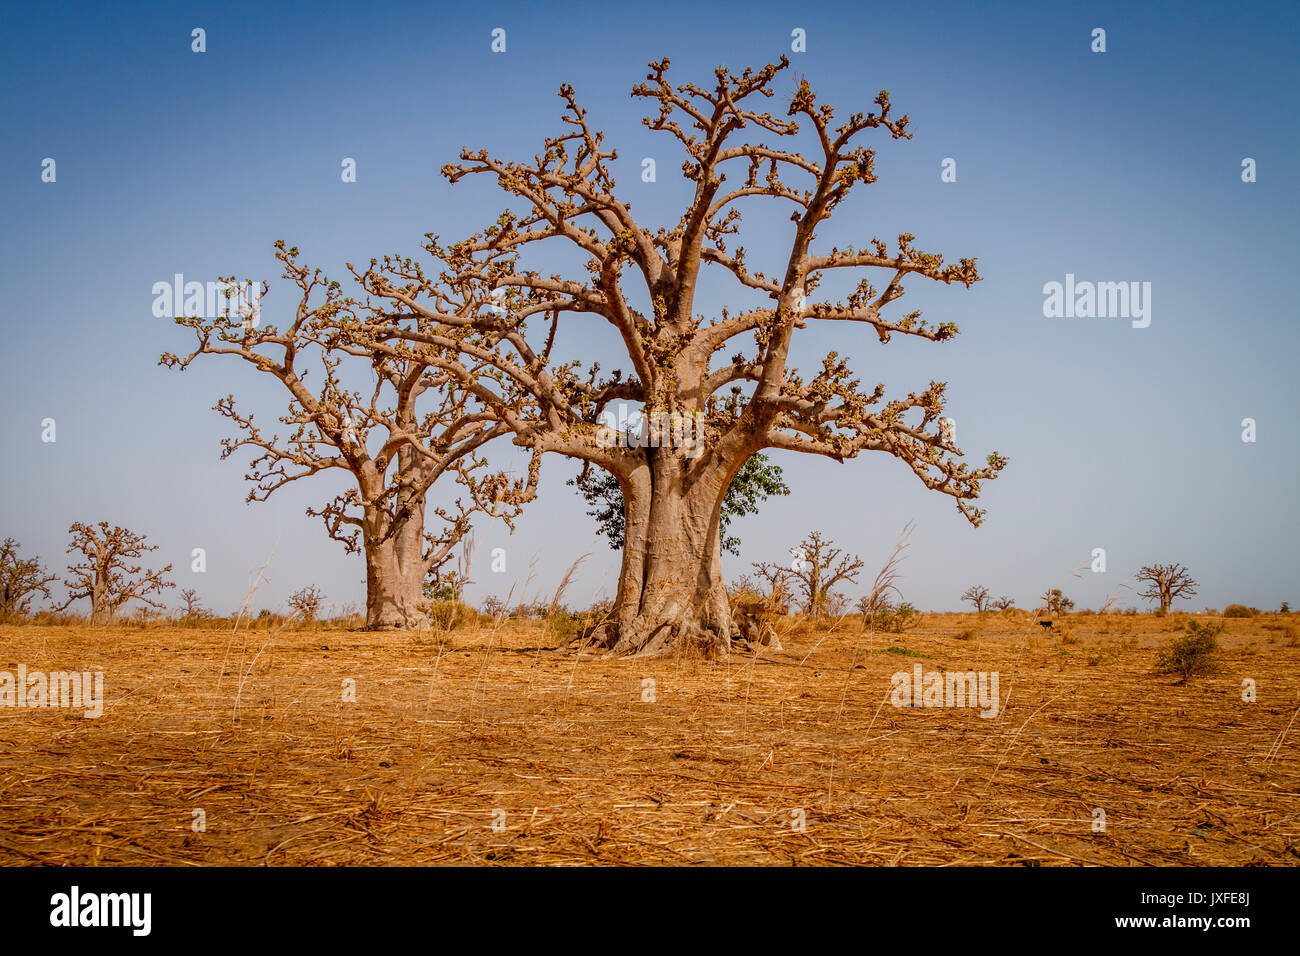 Massive baobab trees in the dry arid savanah of south west Senegal. Stock Photo